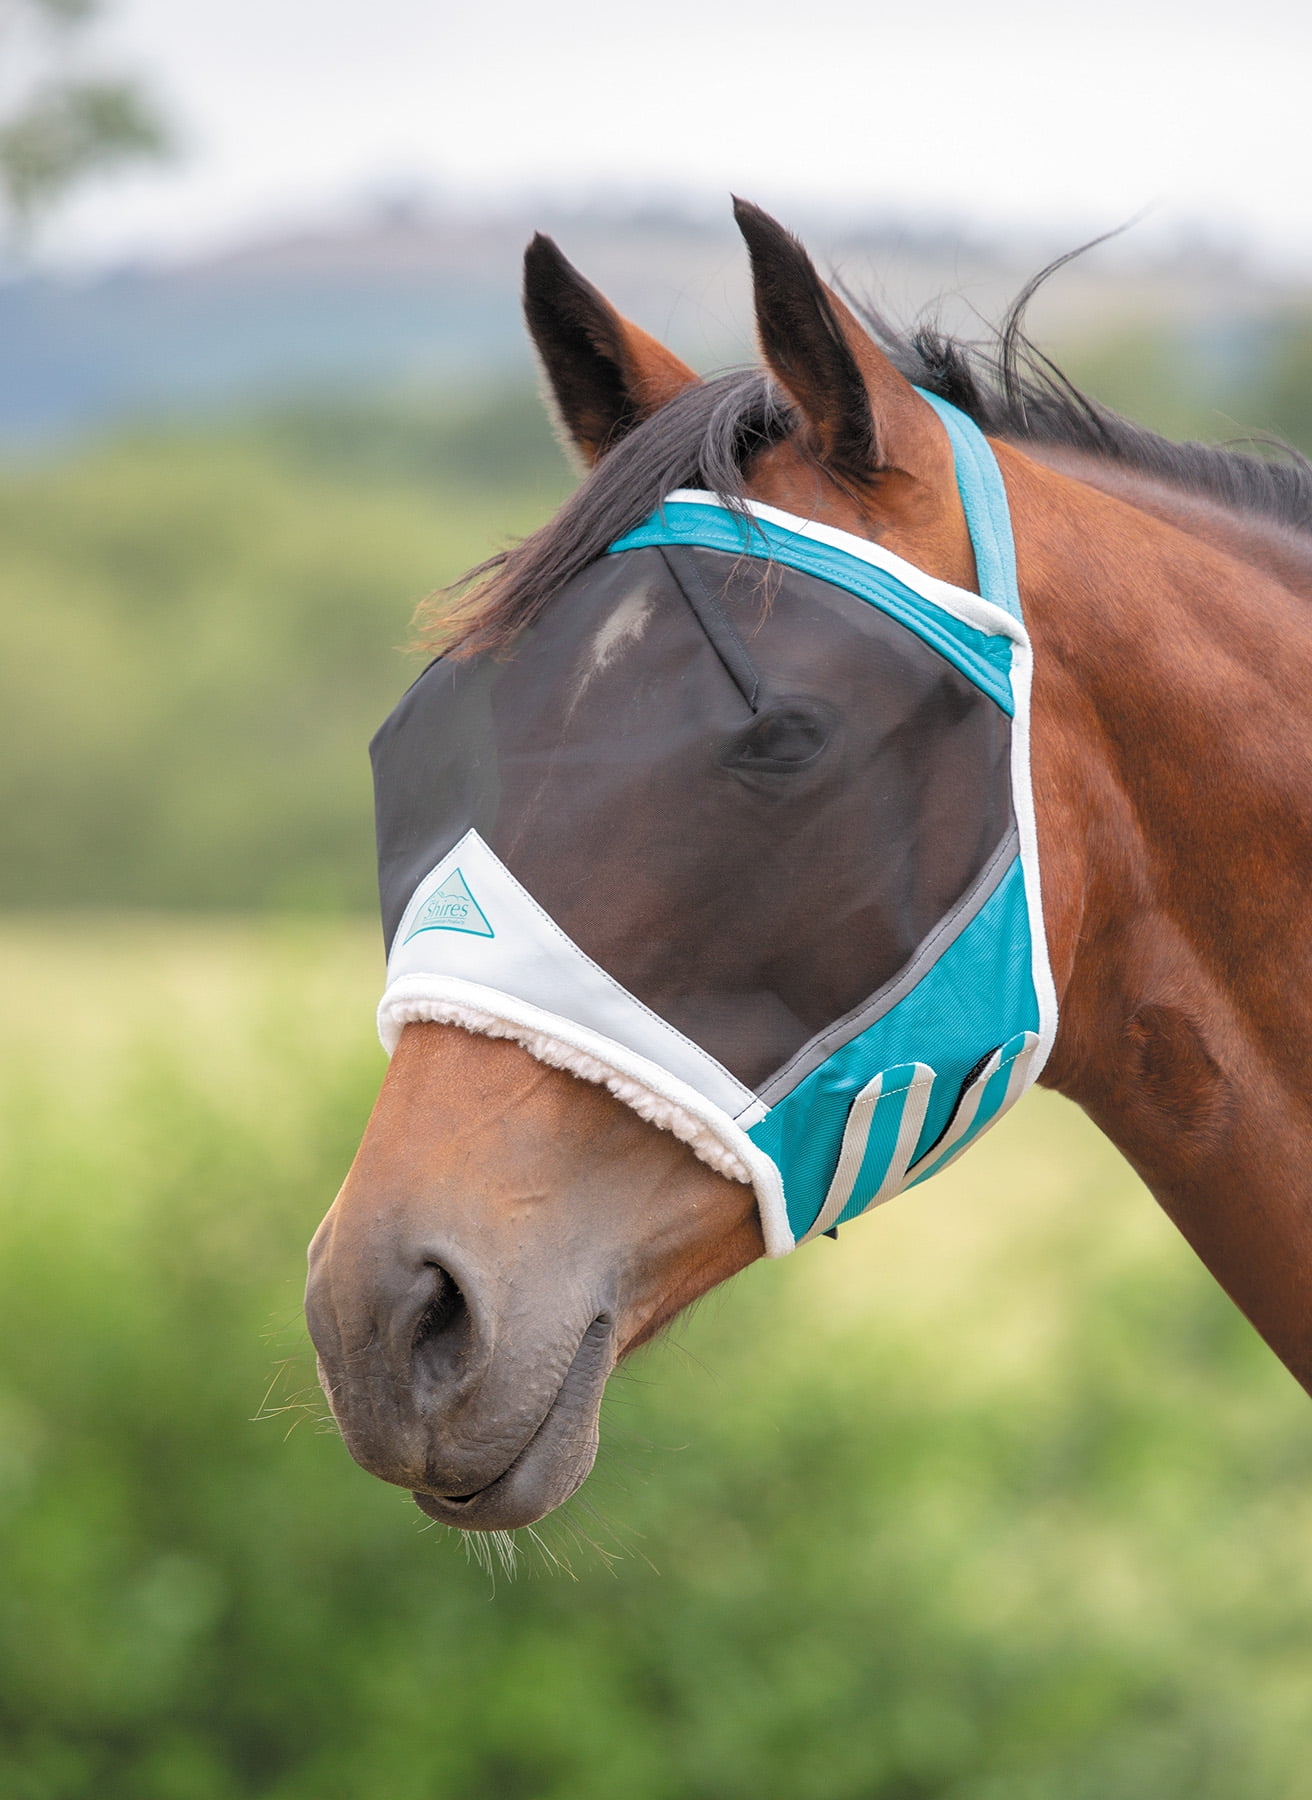 Shires Fly Mask Without Ears